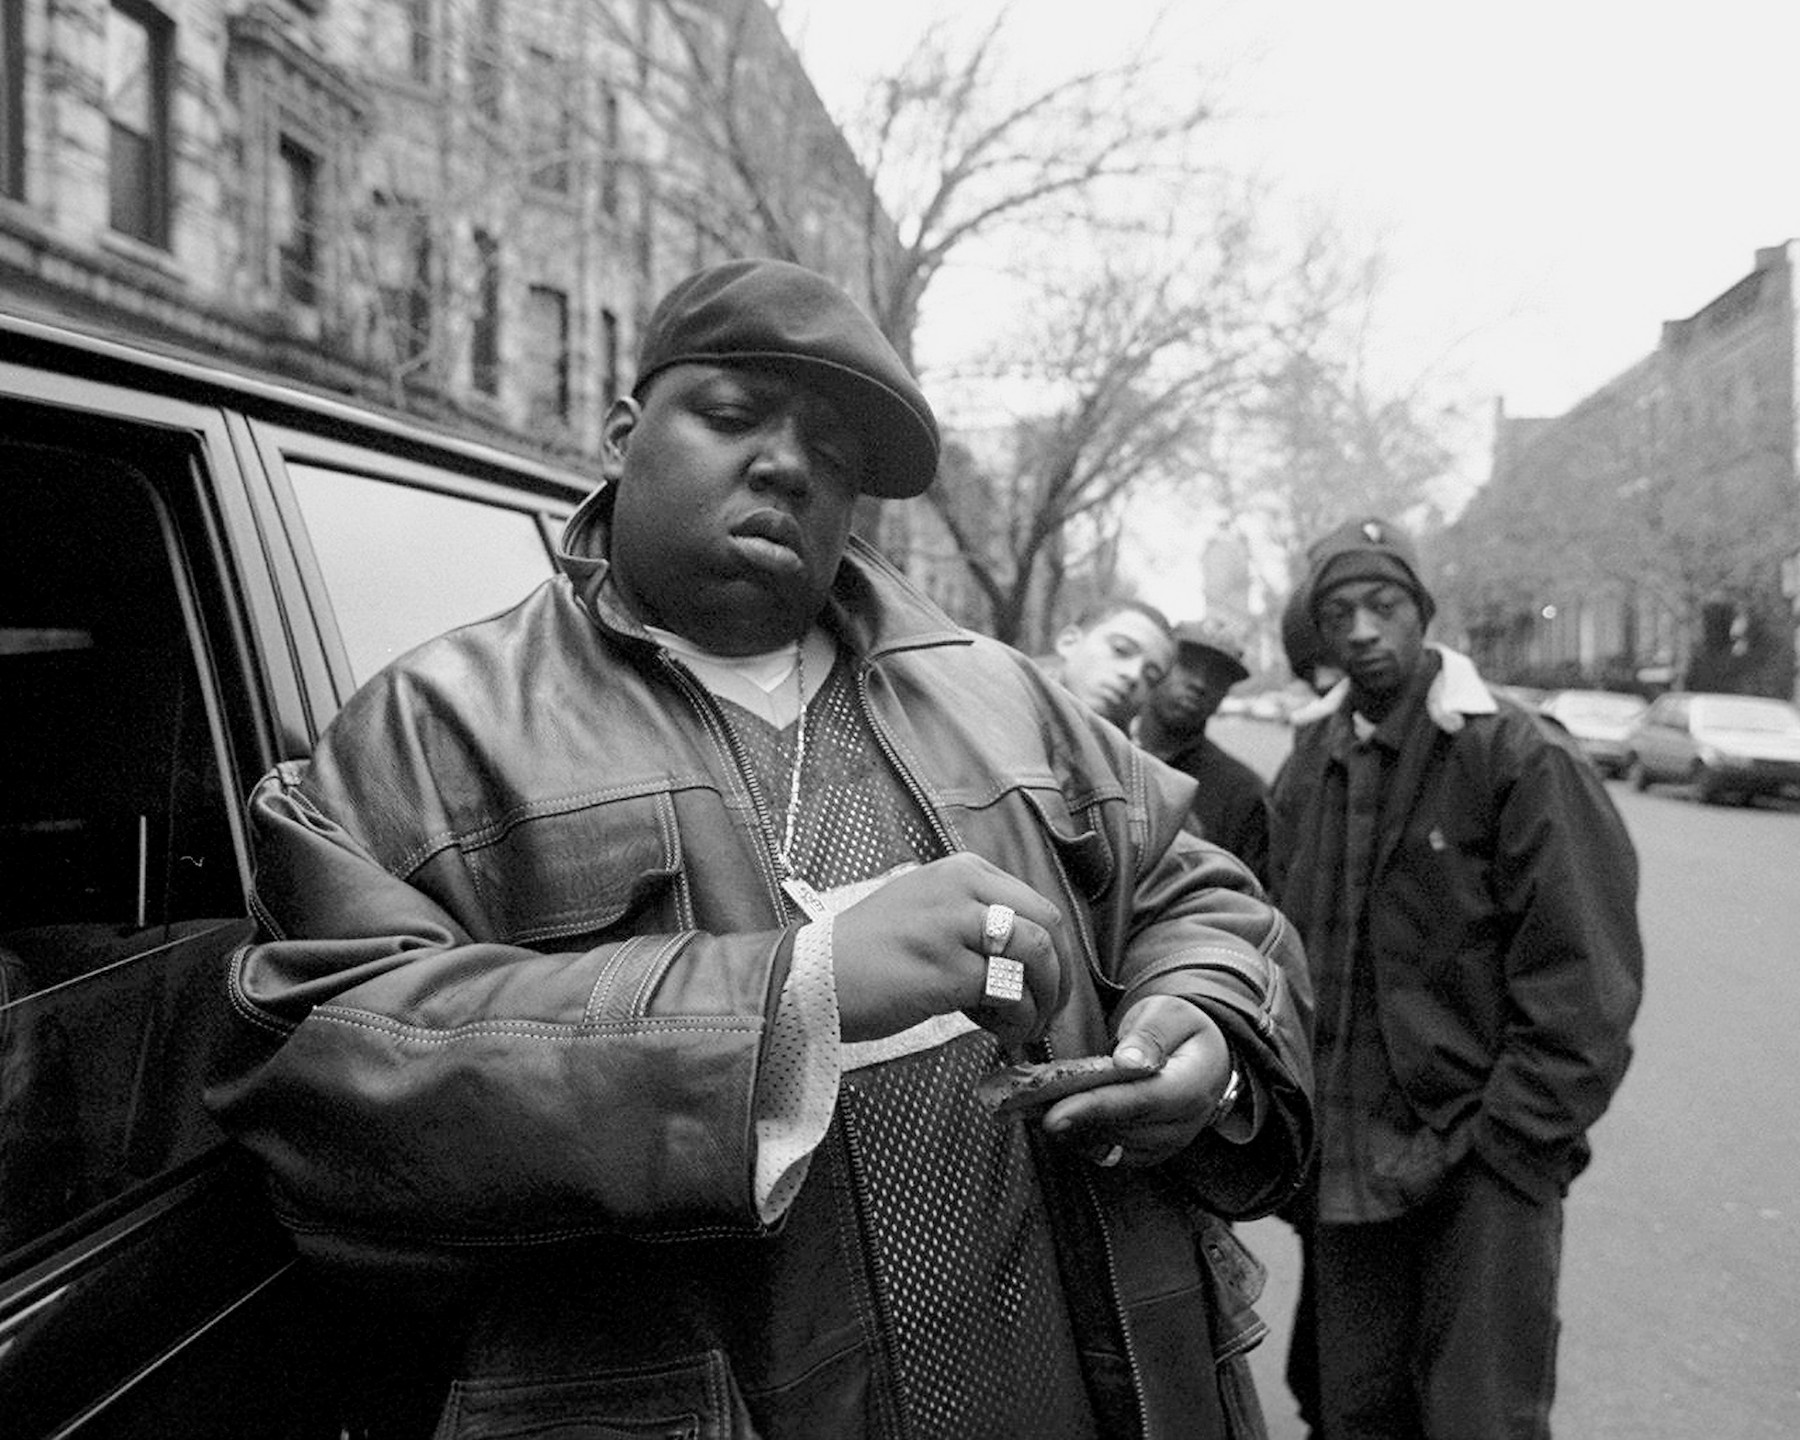 The Notorious B.I.G., real name Christopher Wallace, posing for a photo next to a car